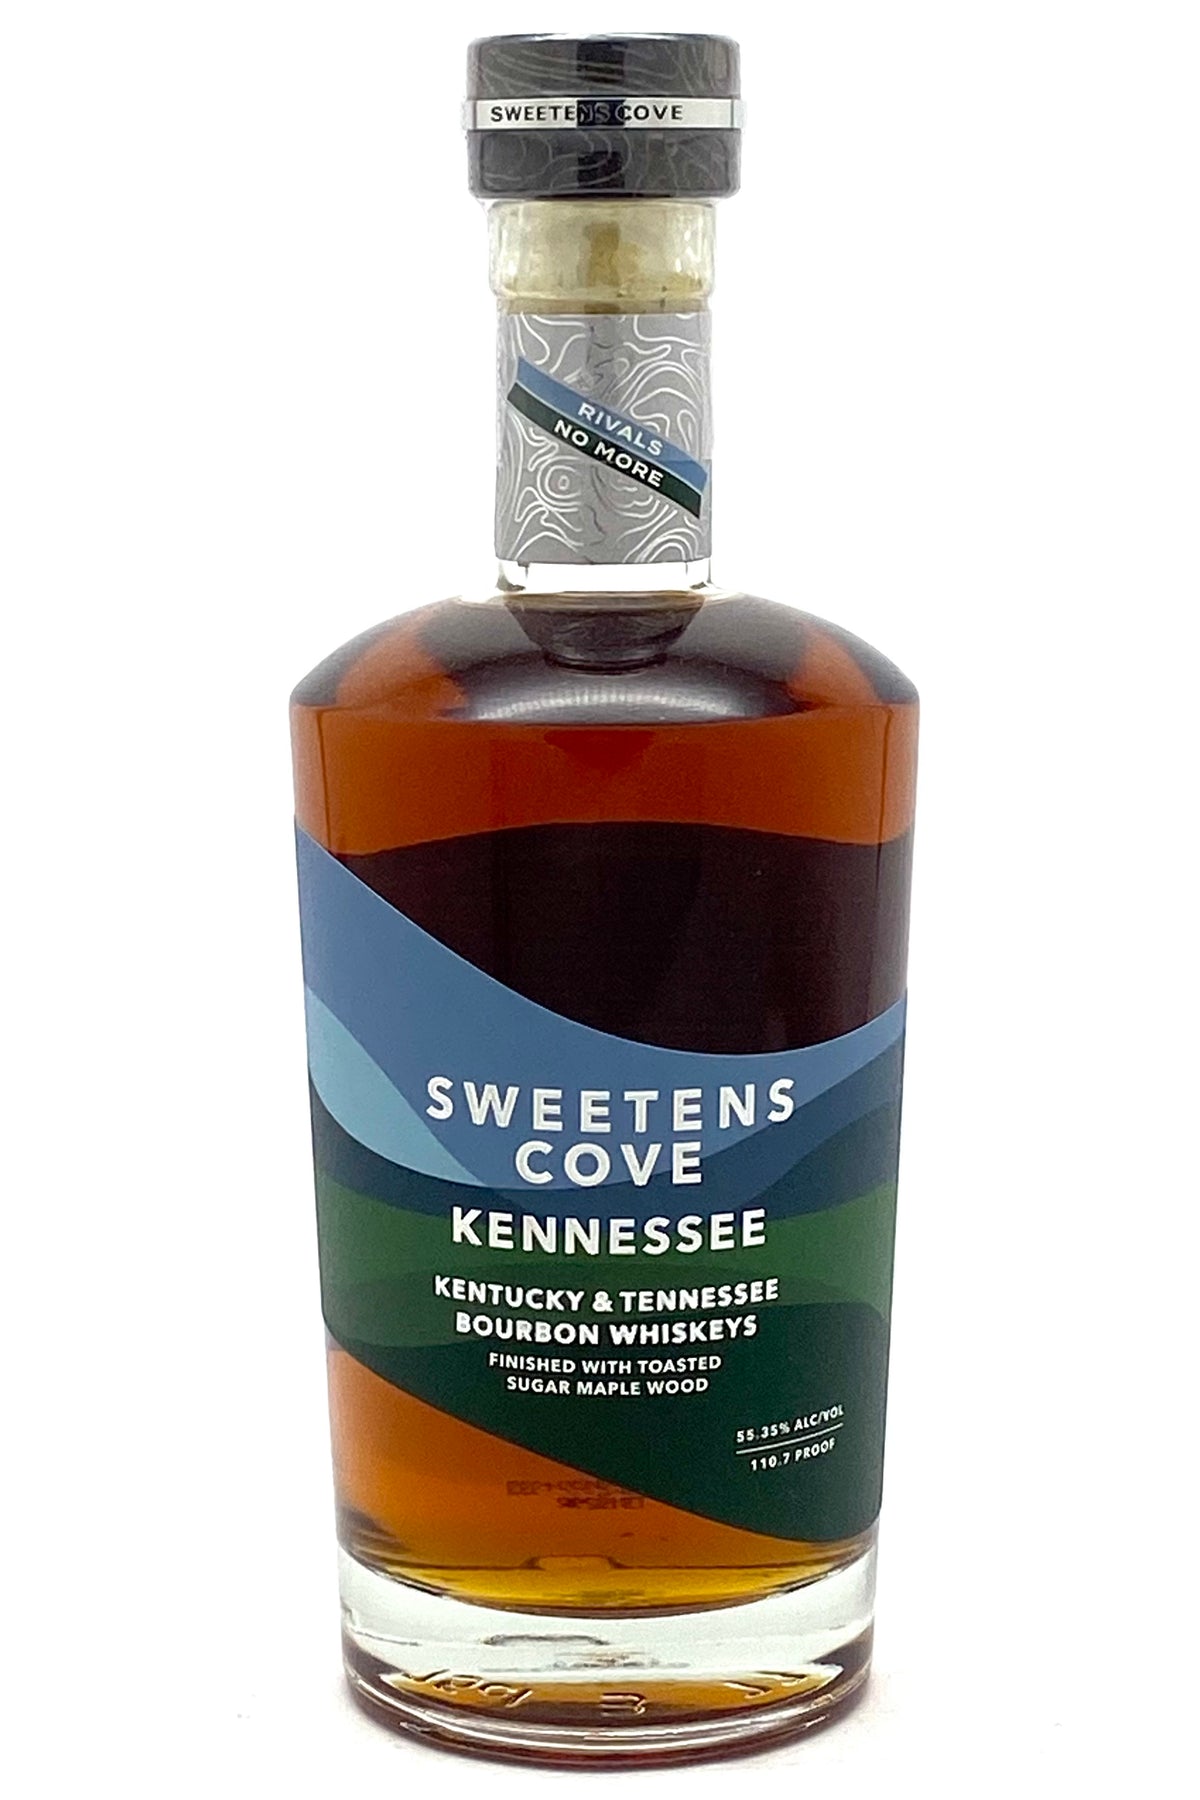 Sweetens Cove Cask Strength Kennessee Bourbon Whiskey Toasted Sugar Maplewood Finished